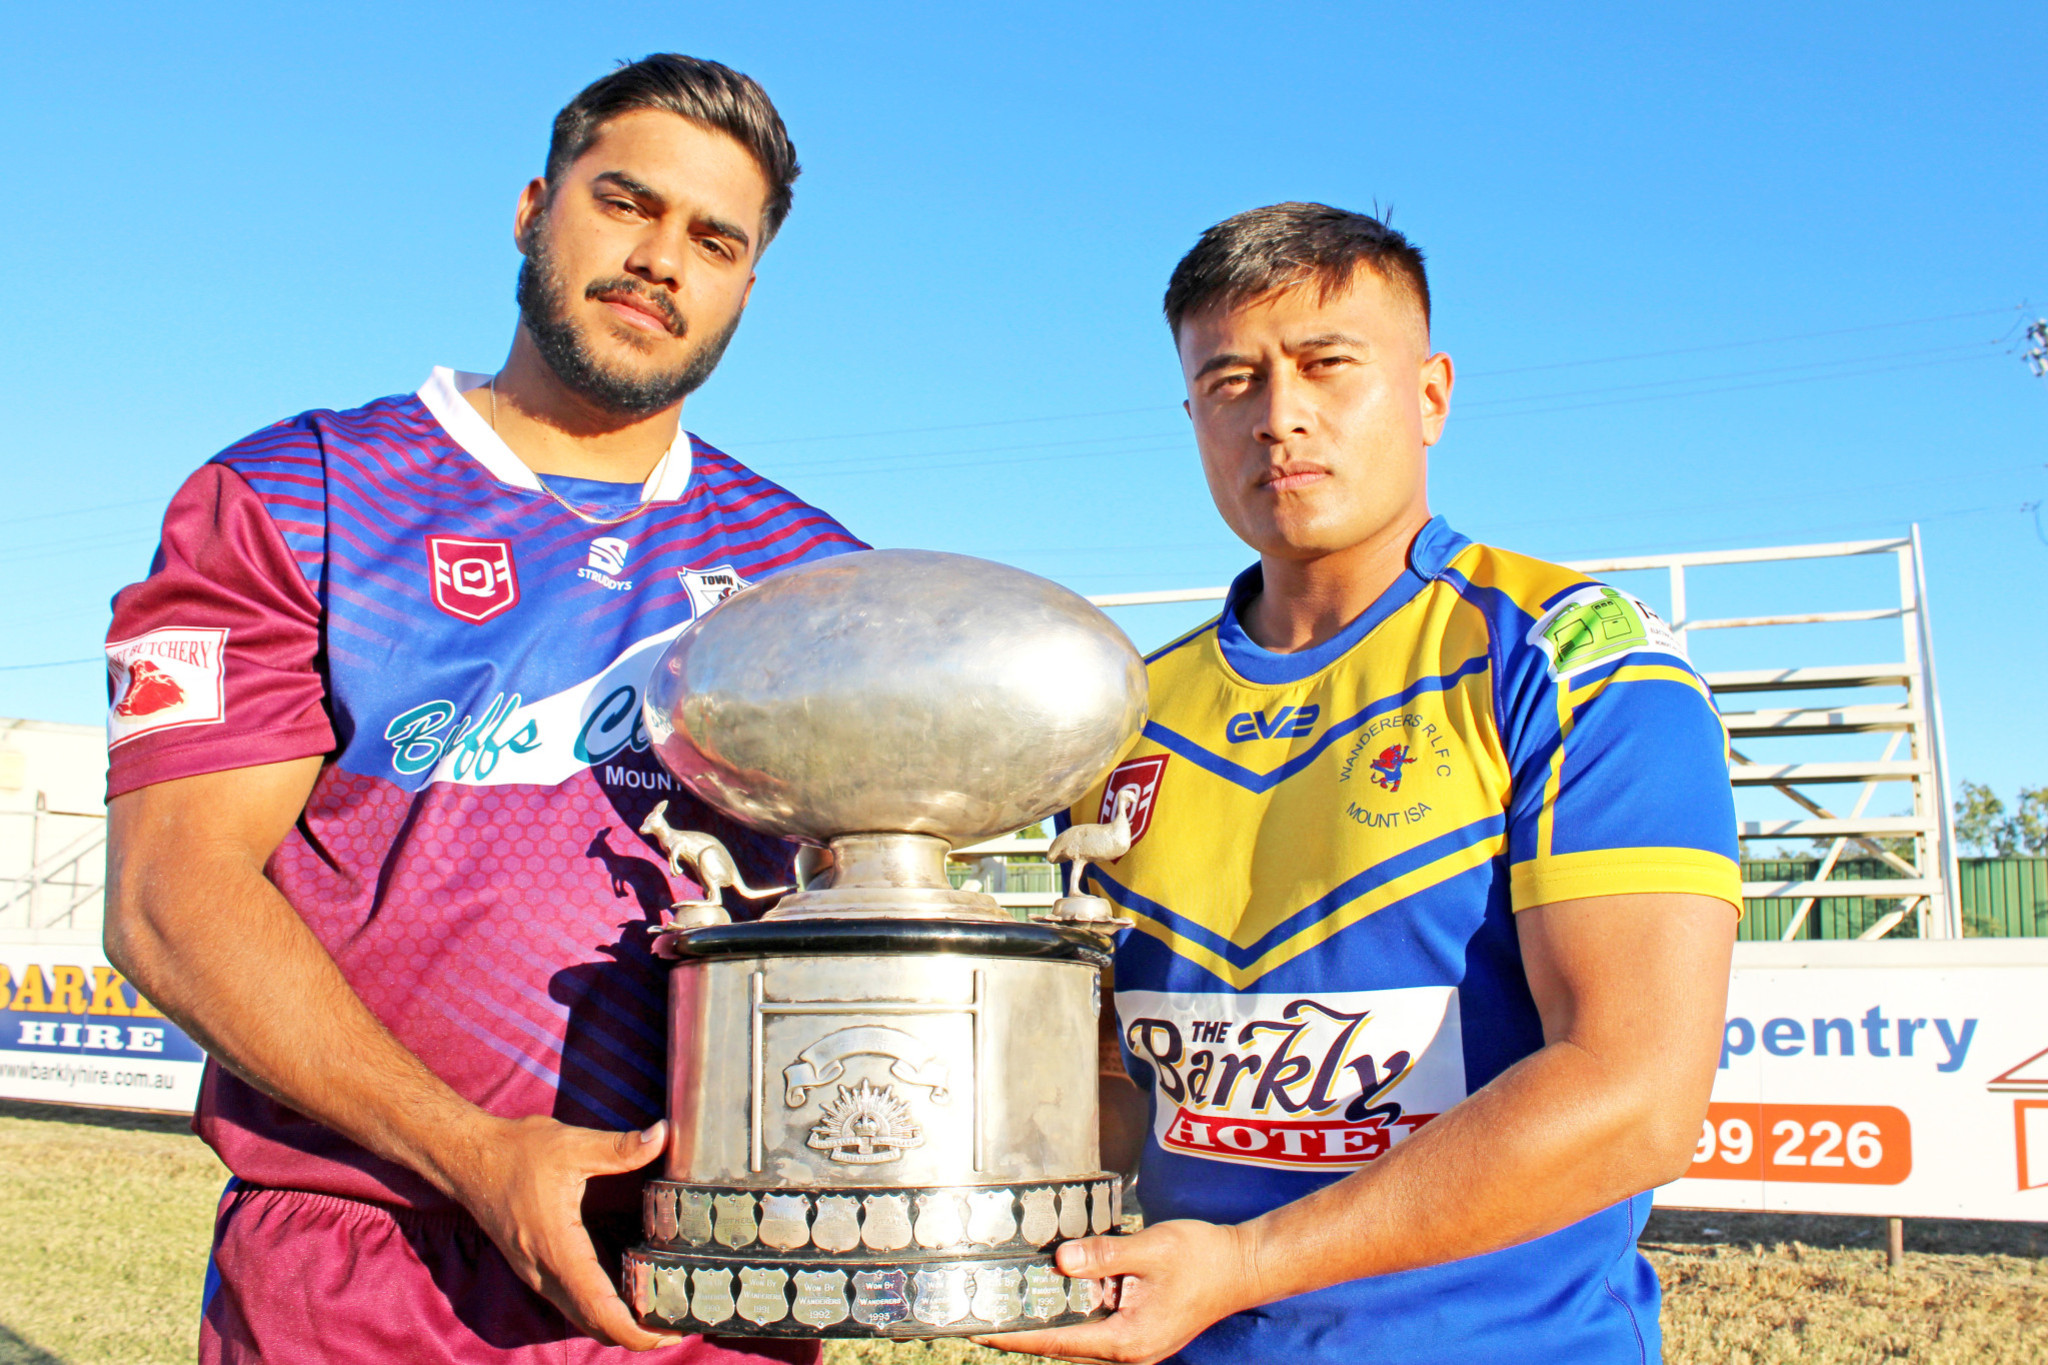 Town captain Harlem Russell and Wanderers skipper Pekz Brown will be key players for their sides in the men’s grand final on Saturday night.